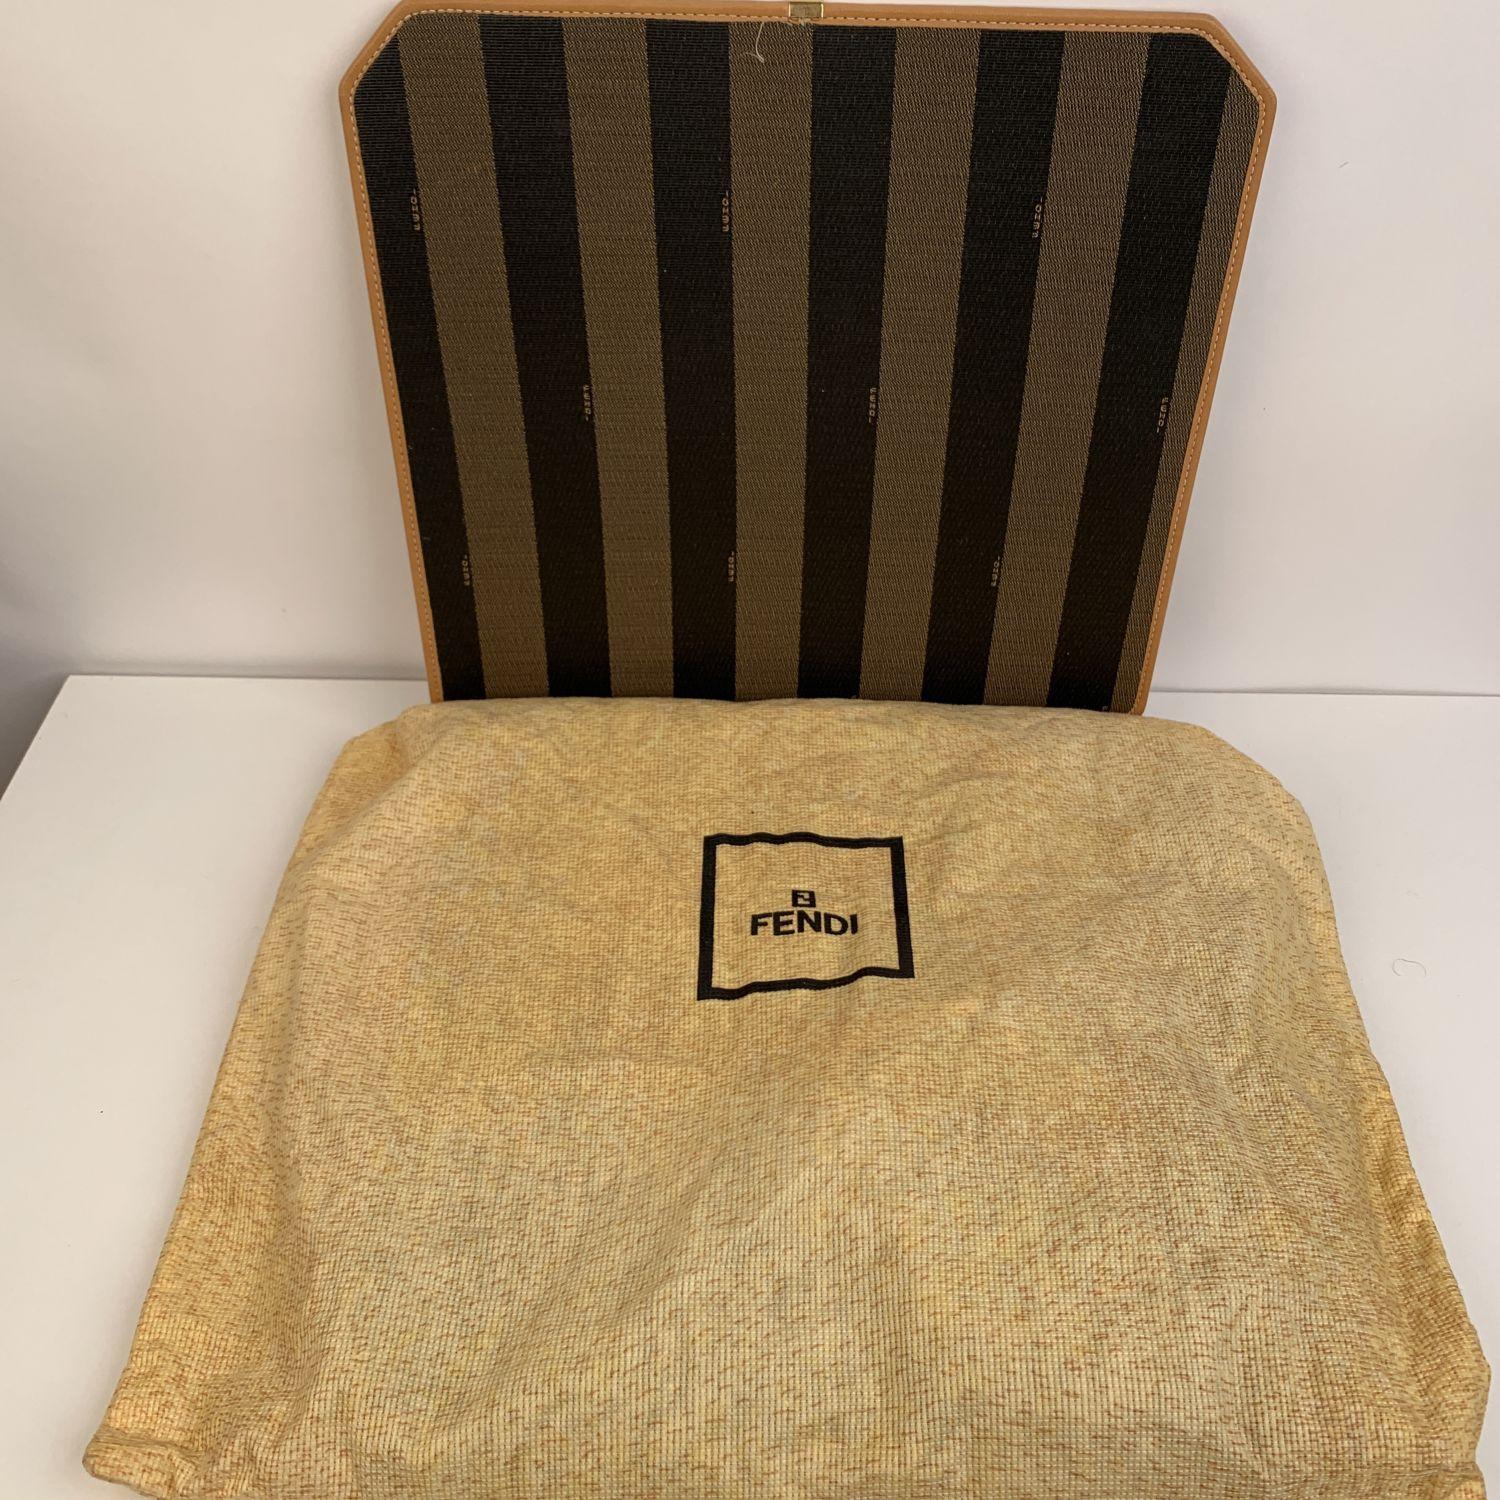 Brown Fendi Pequin Striped Canvas Set of 6 Placemats and Coasters